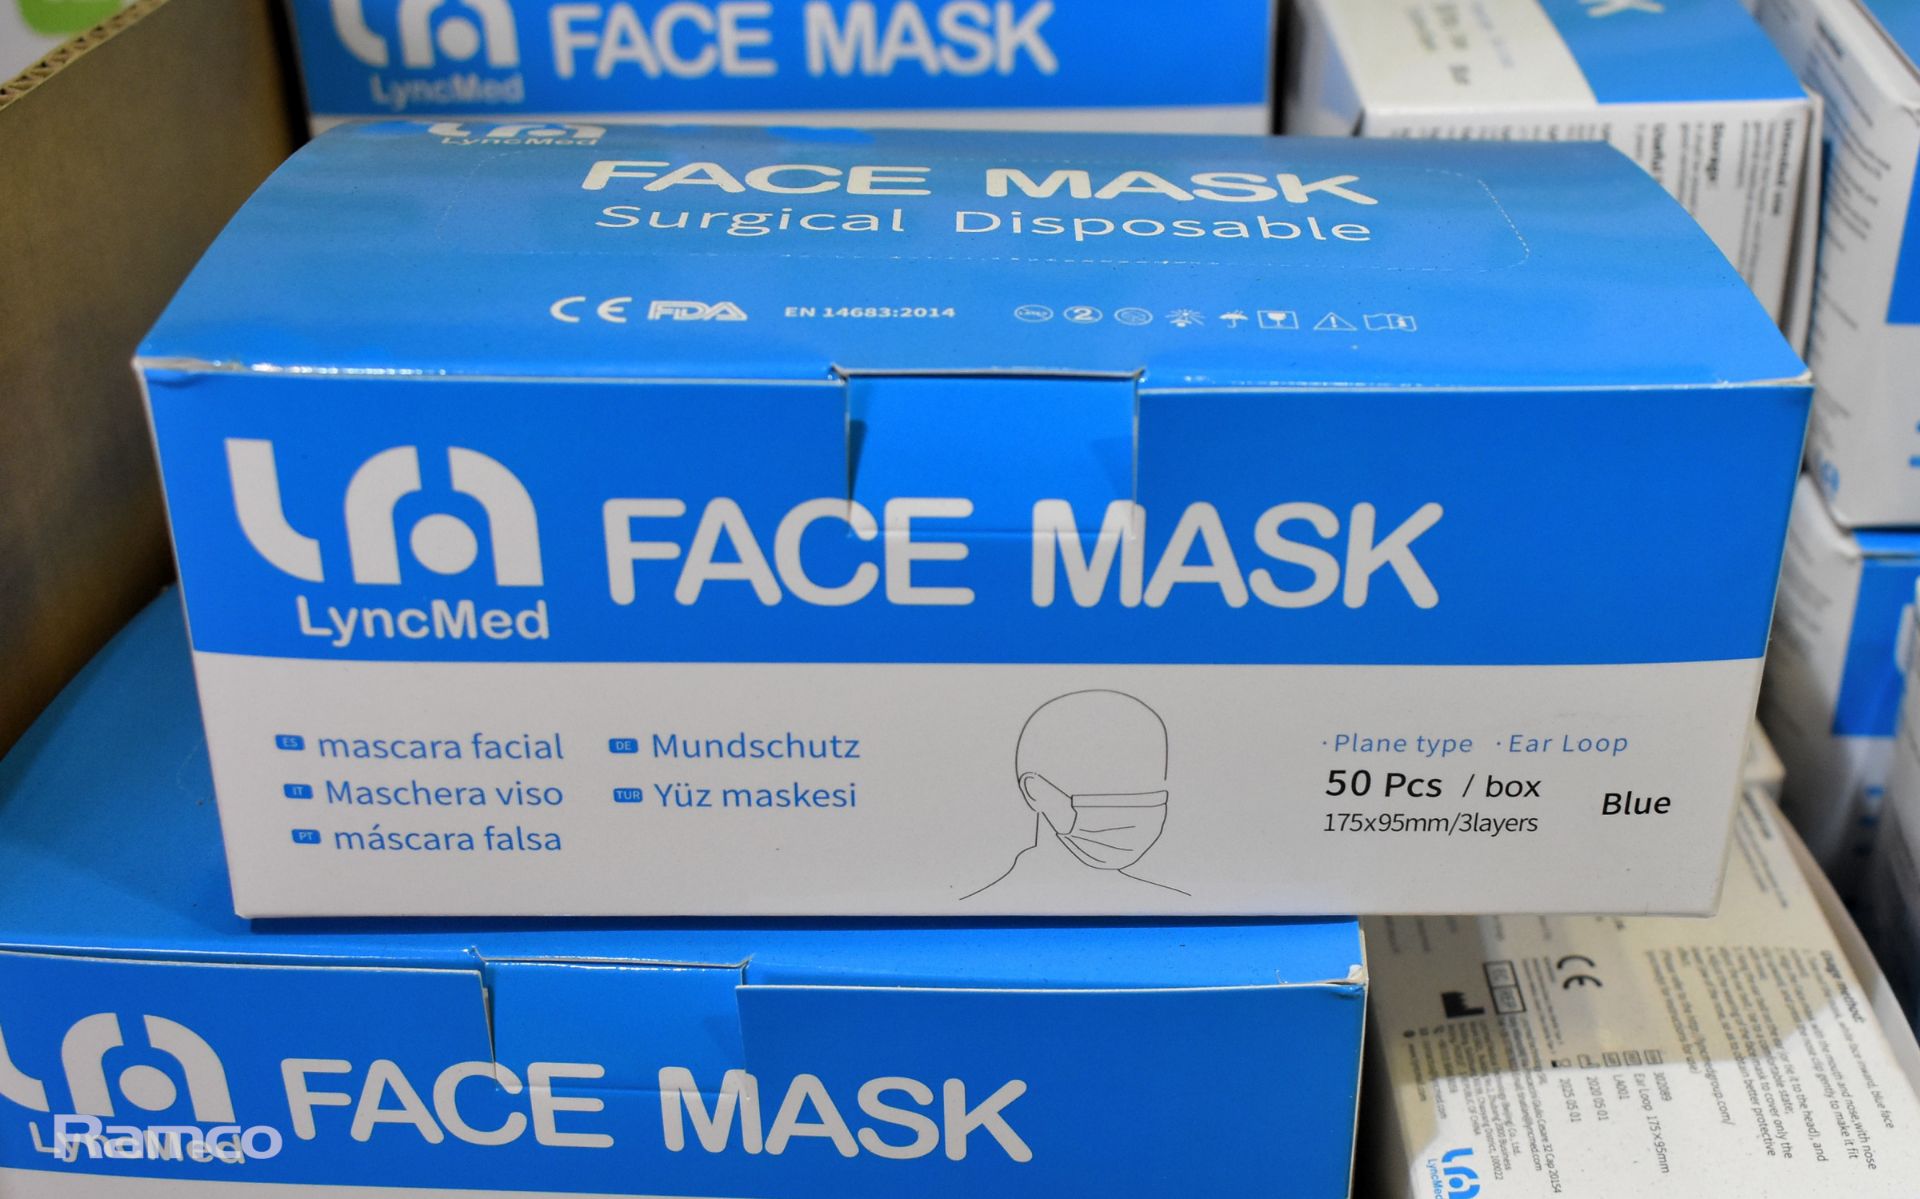 26x boxes of LyncMed surgical disposable face masks - Blue - 50 pcs per box - Image 2 of 3